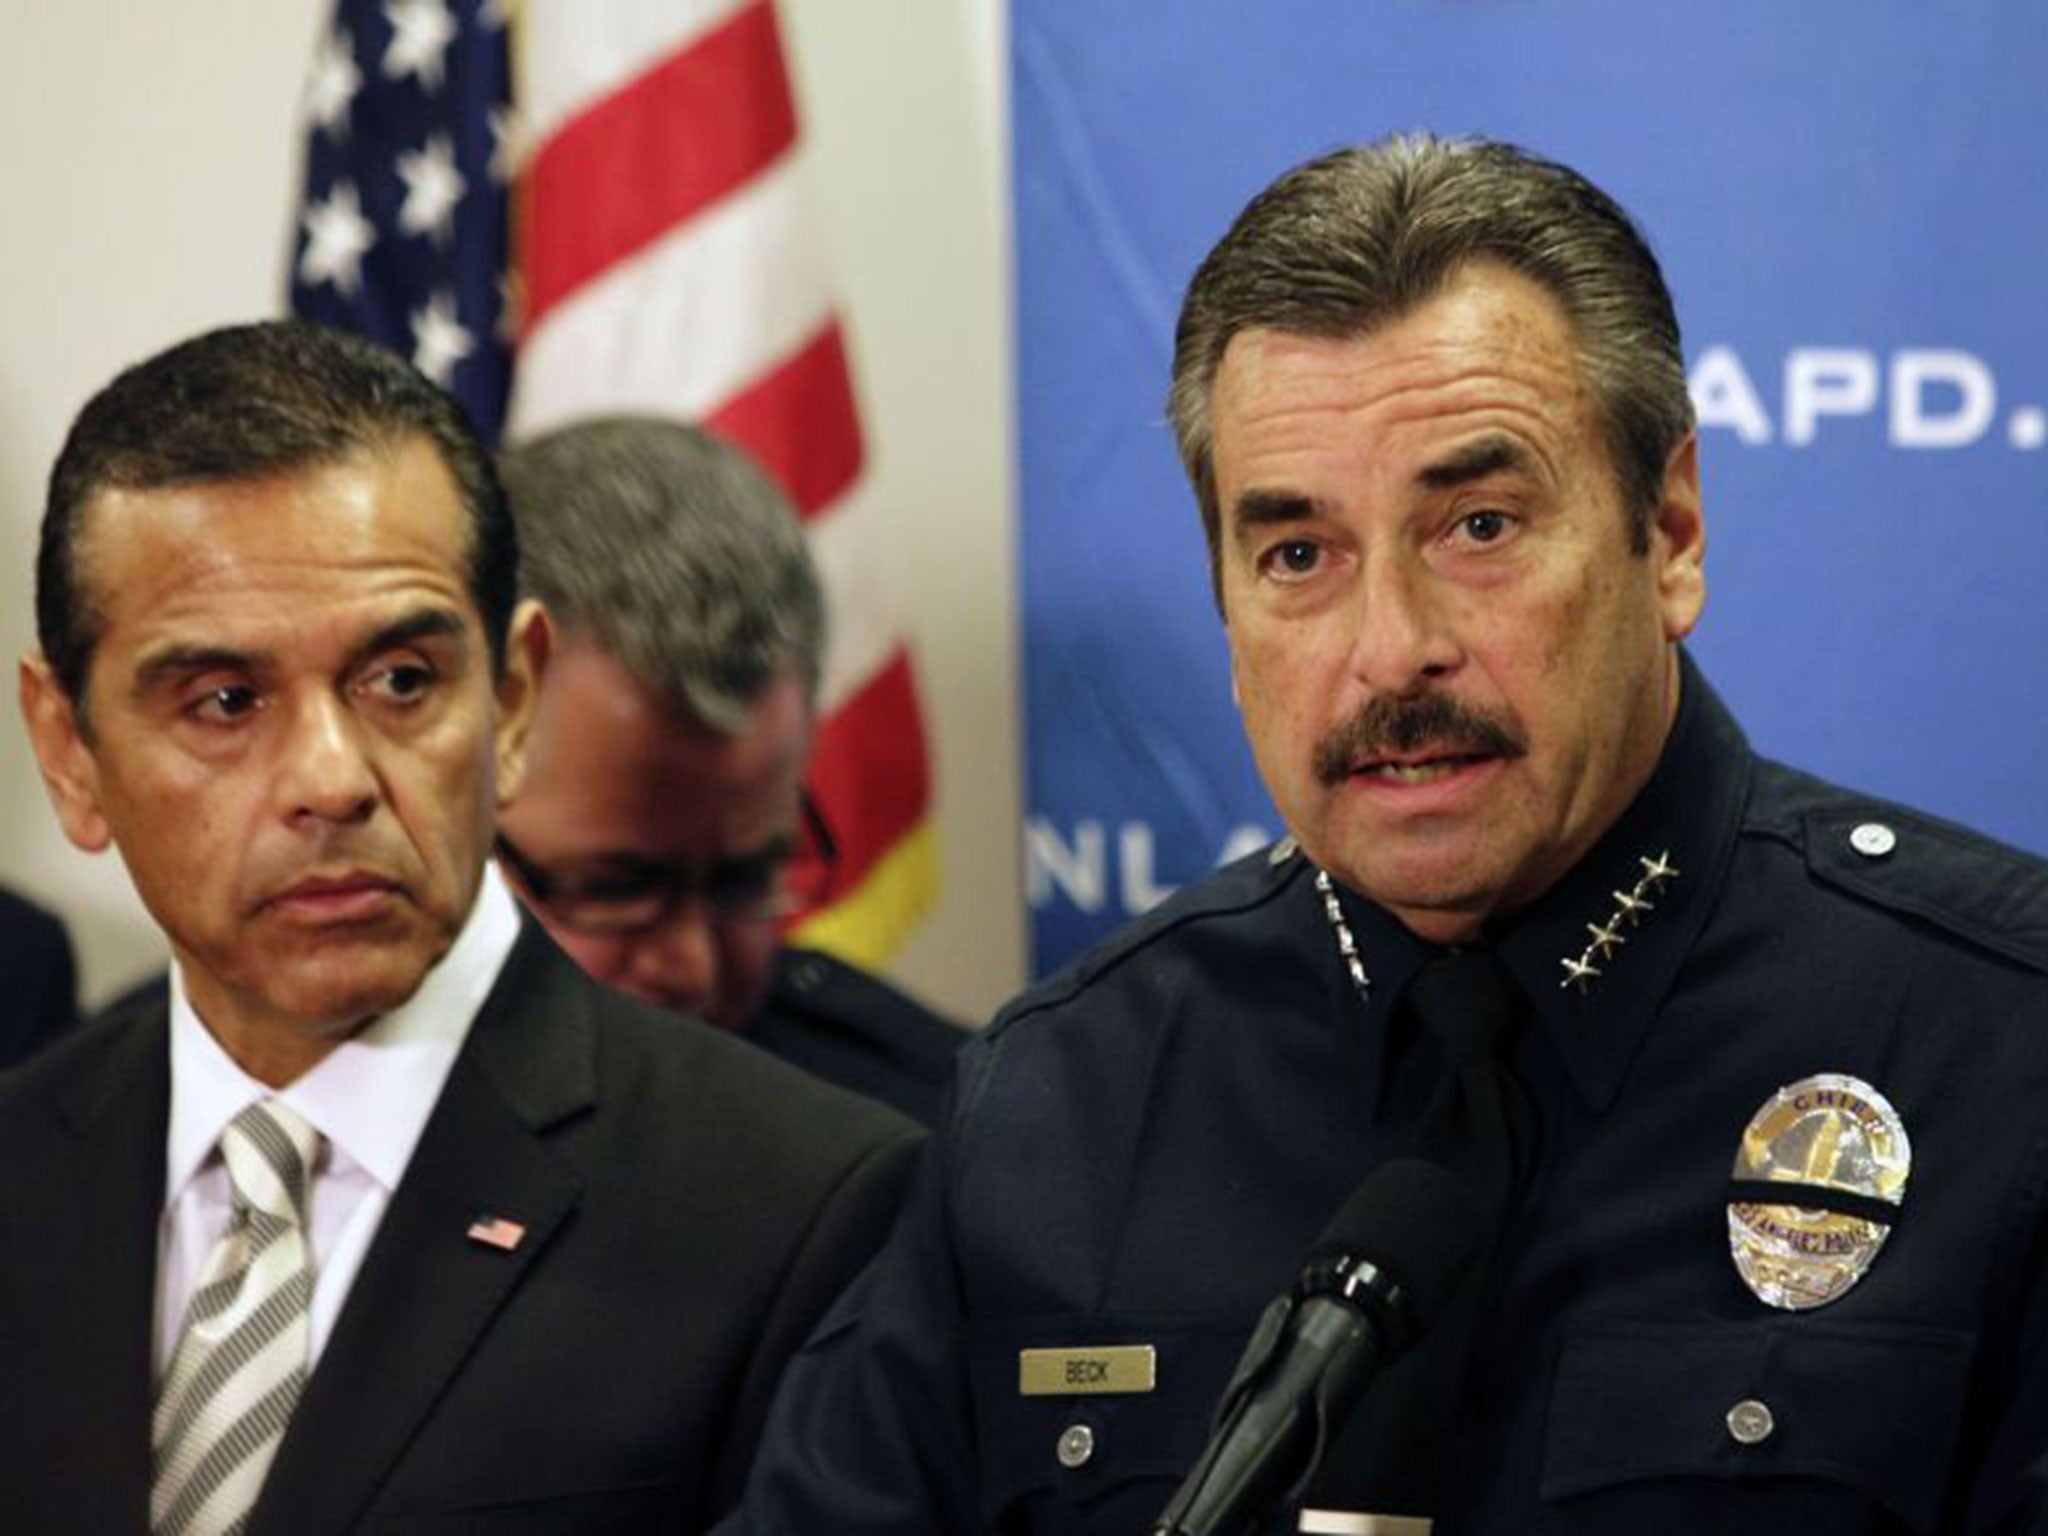 LAPD Chief Charlie Beck told local media: 'I'm extremely troubled by what they've done. It's a violation of public trust'